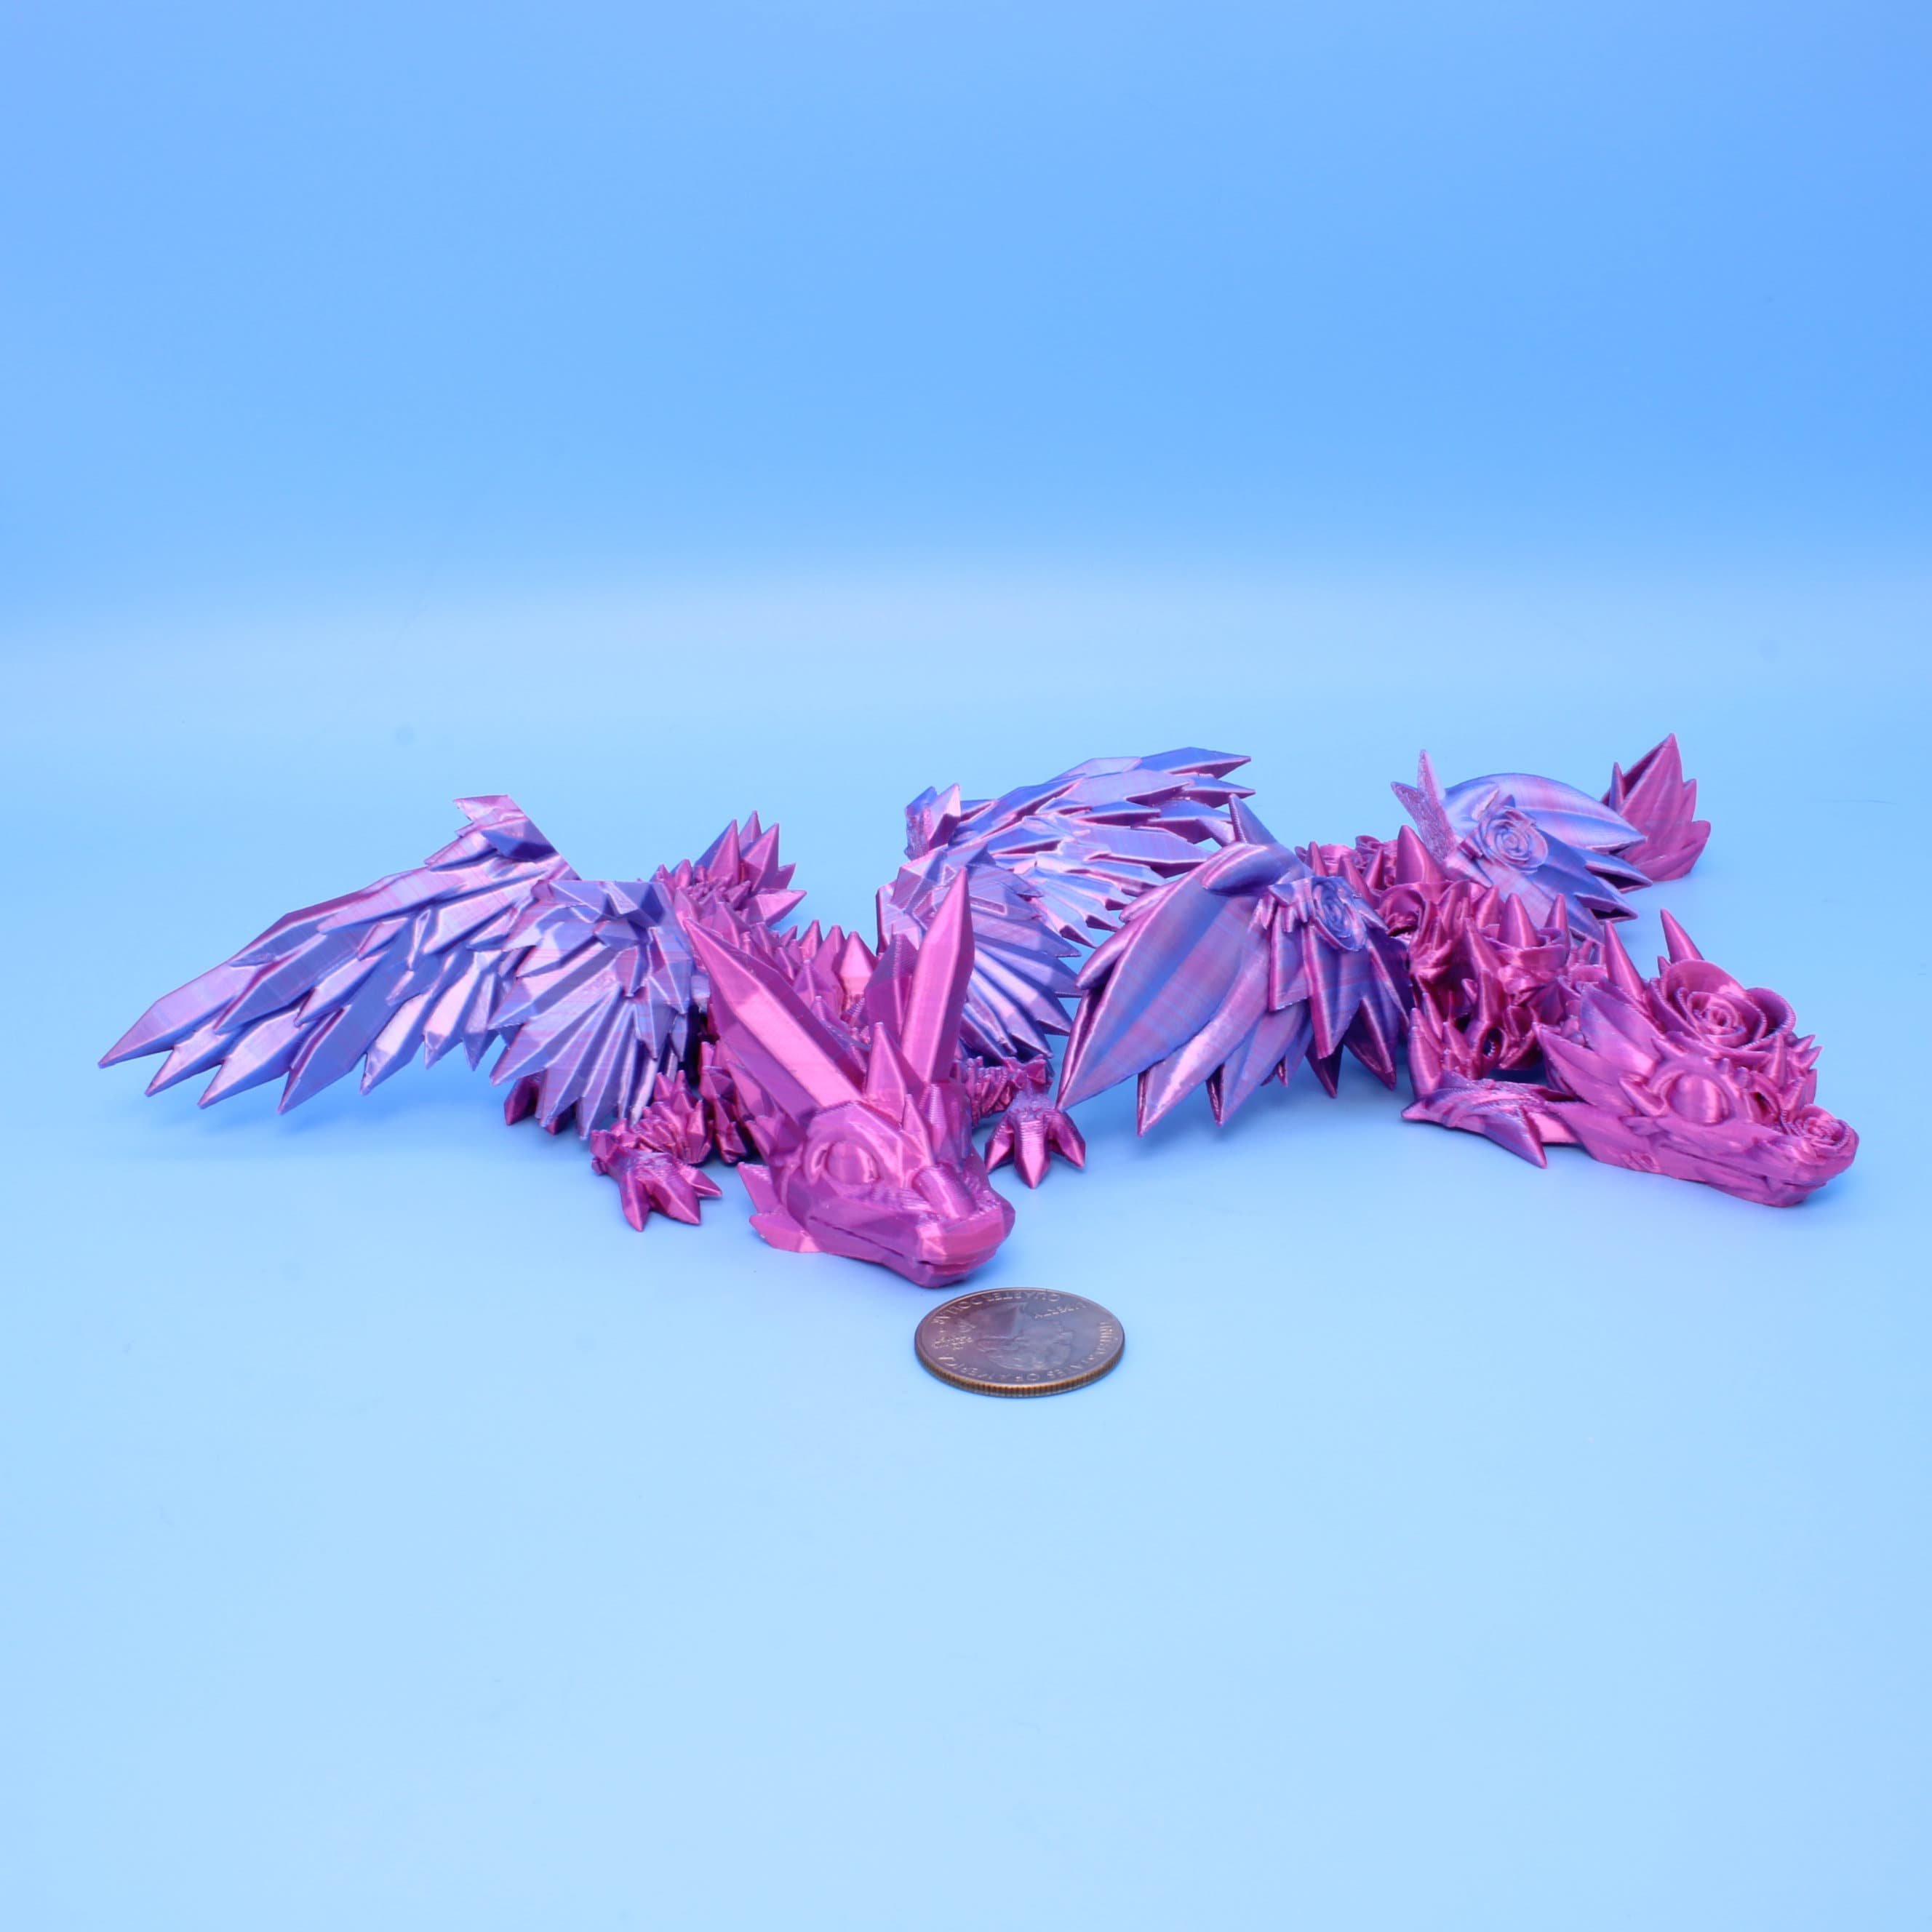 Baby Crystal & Rose Wing Dragon | Miniature | 3D printed | 7 in.